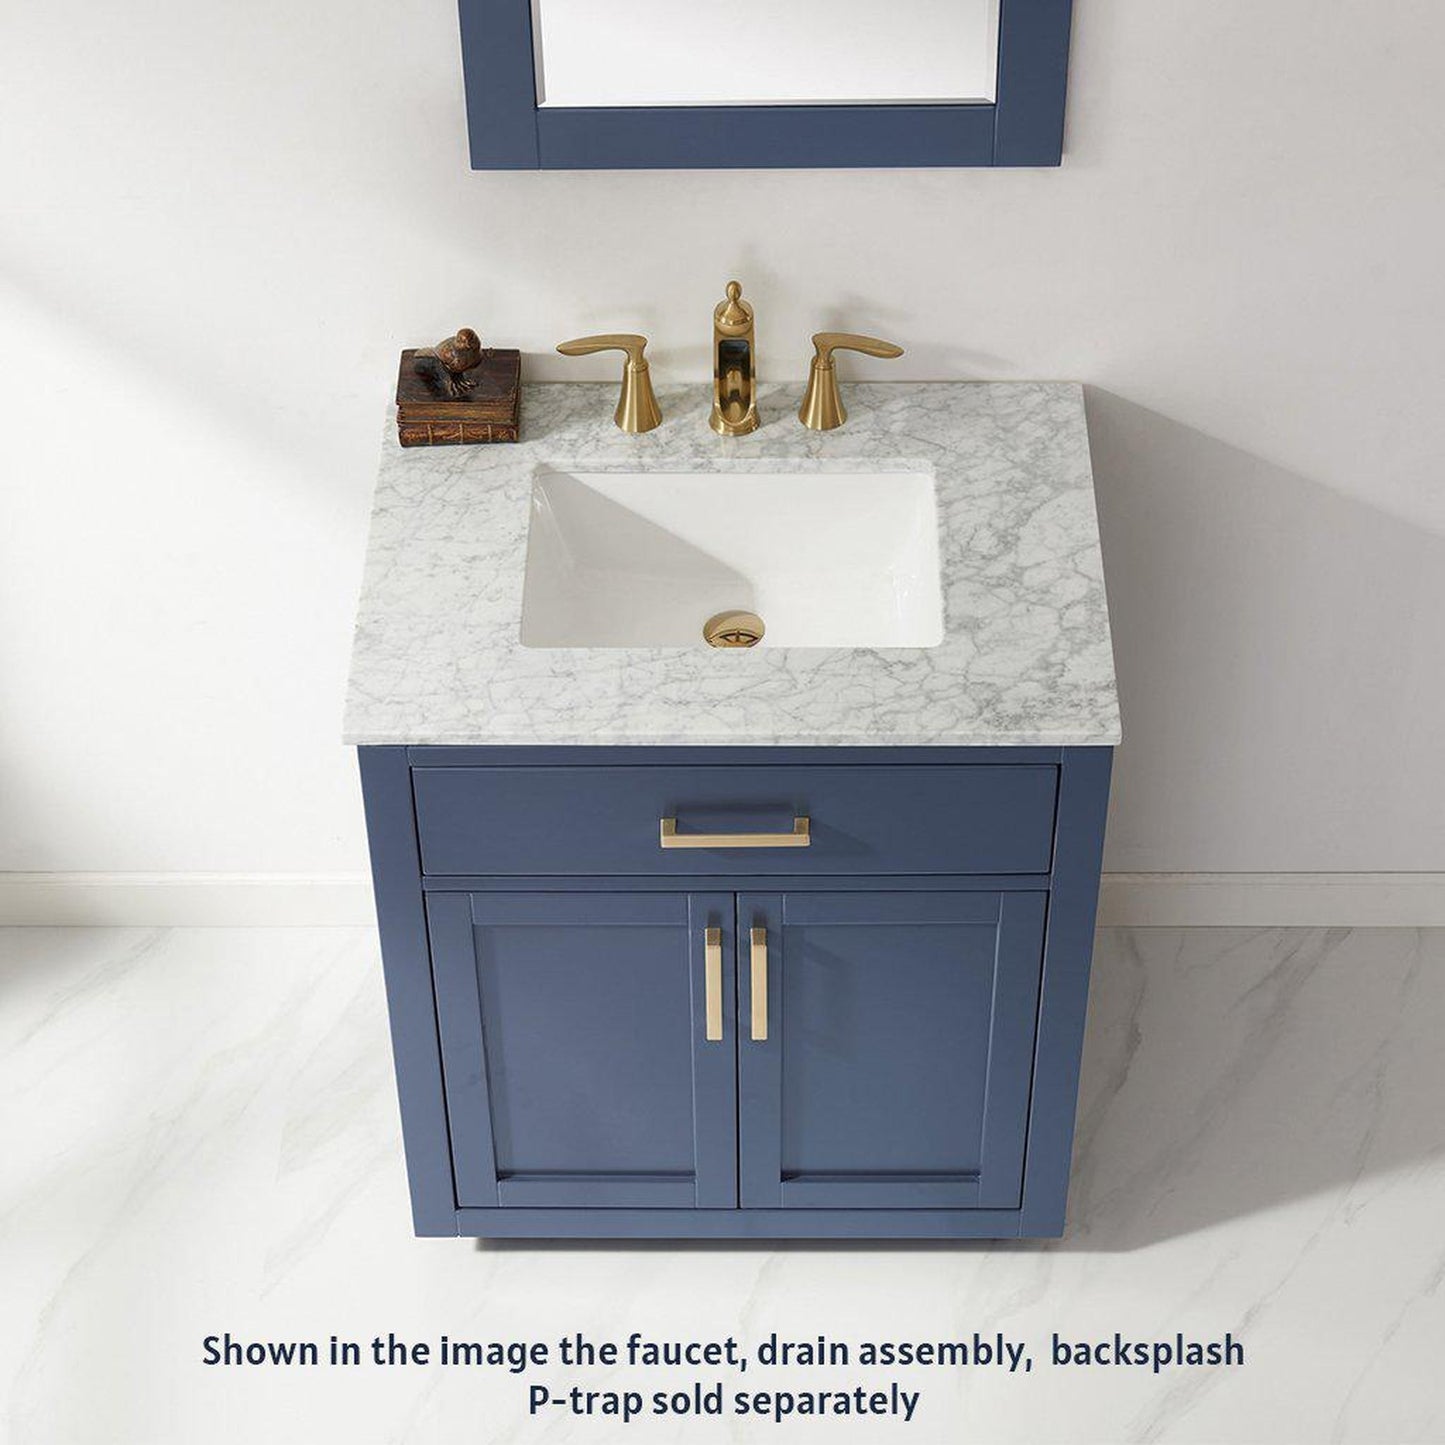 Altair Ivy 30" Single Royal Blue Freestanding Bathroom Vanity Set With Mirror, Natural Carrara White Marble Top, Rectangular Undermount Ceramic Sink, and Overflow